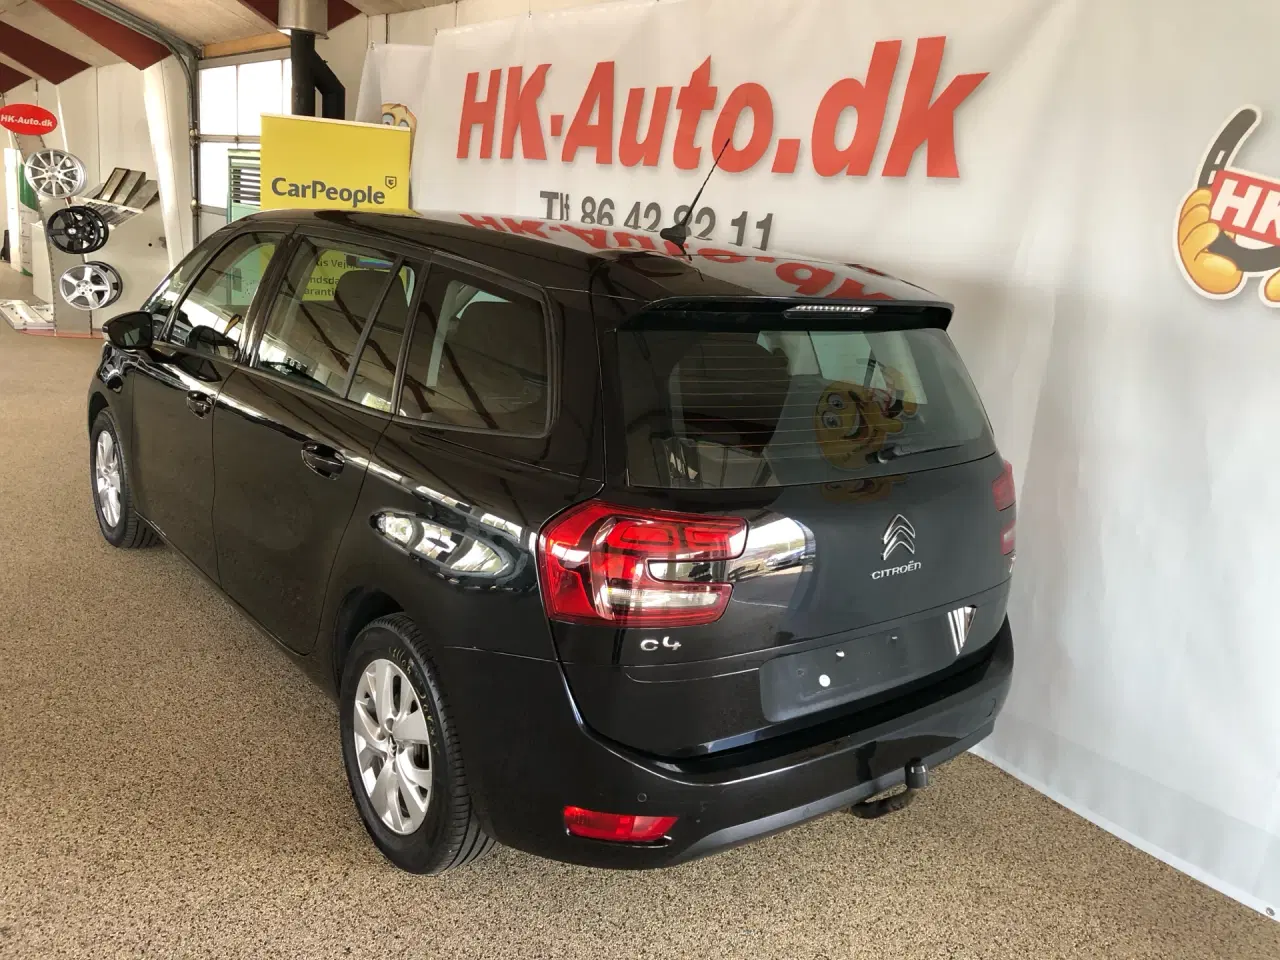 Billede 3 - Citroën Grand C4 Picasso 1,6 Blue HDi Iconic start/stop 120HK 6g